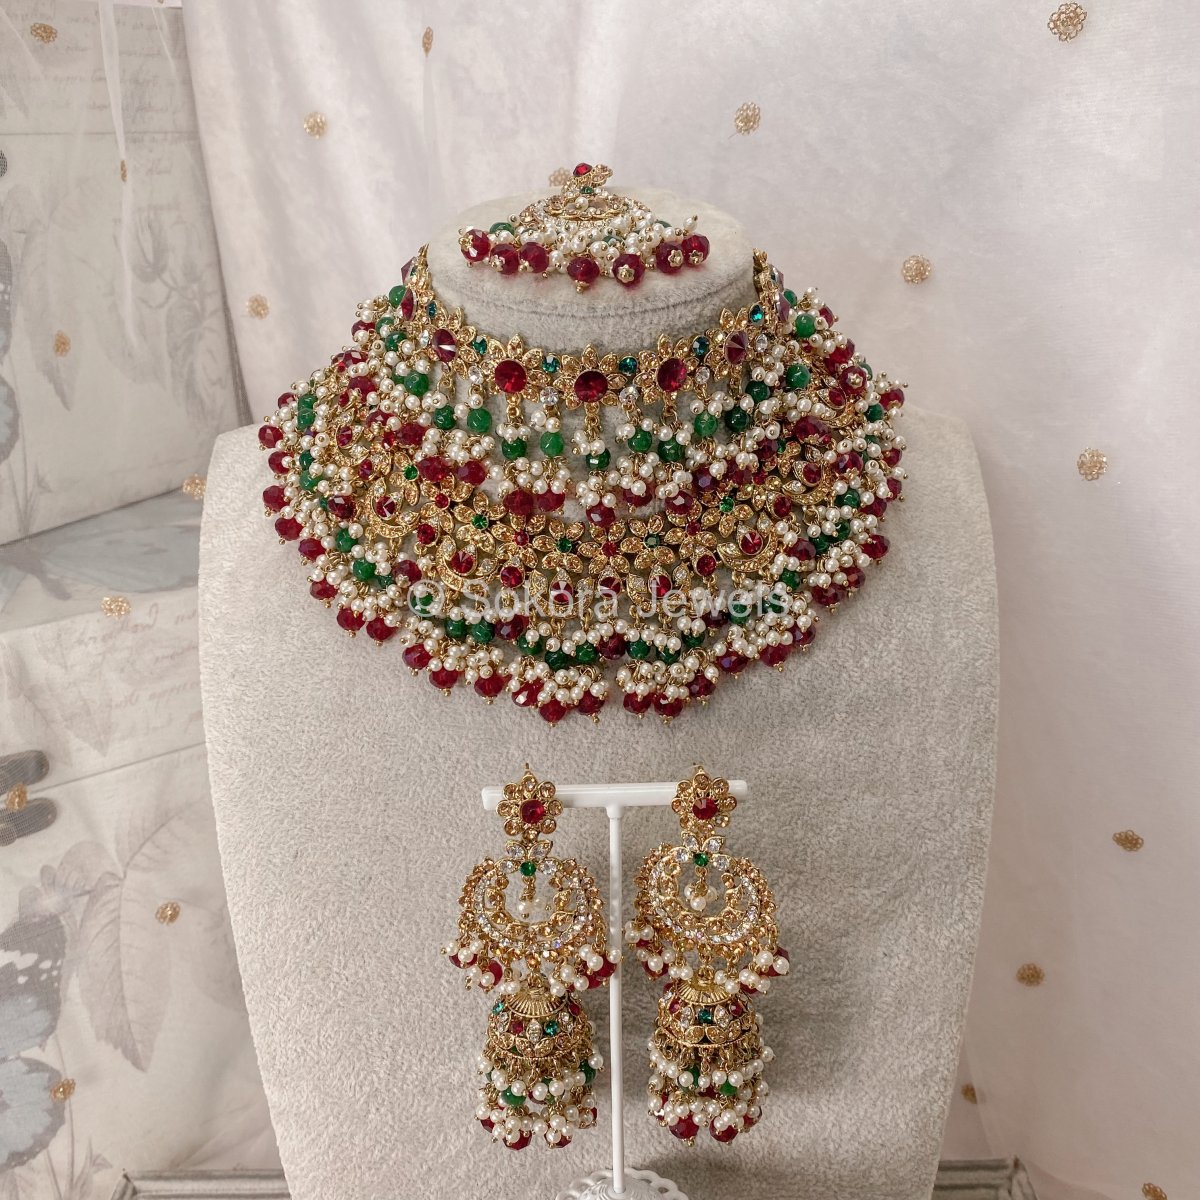 Nadia Double Bridal Necklace Set - Maroon/Green - SOKORA JEWELSNadia Double Bridal Necklace Set - Maroon/Greennecklace sets